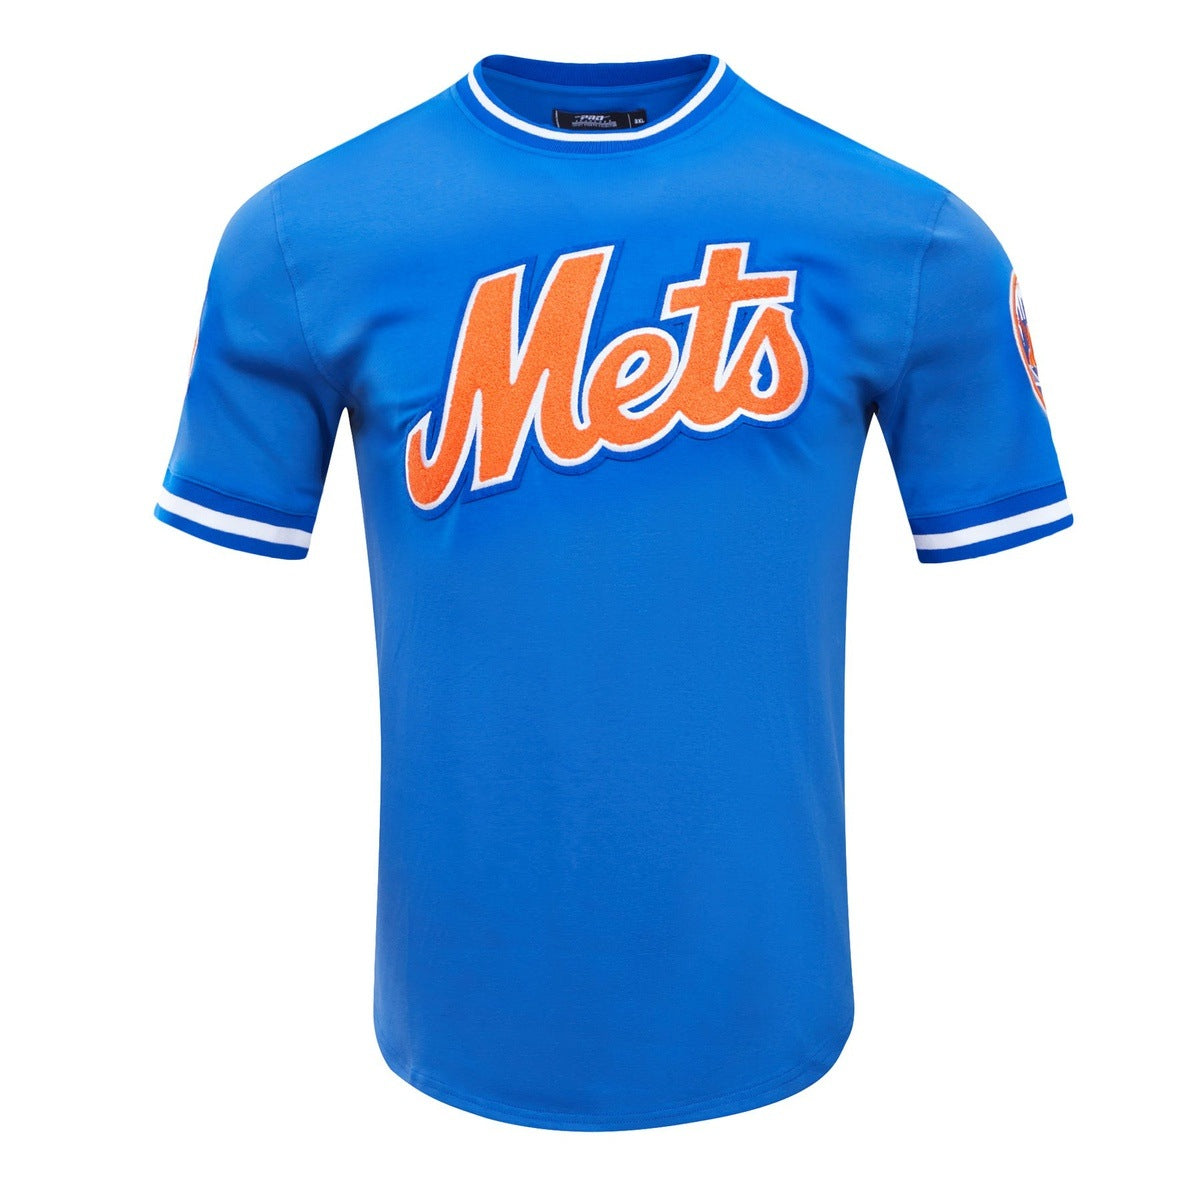 NEW YORK METS CLASSIC CHENILLE DK TEE (ROYAL BLUE)